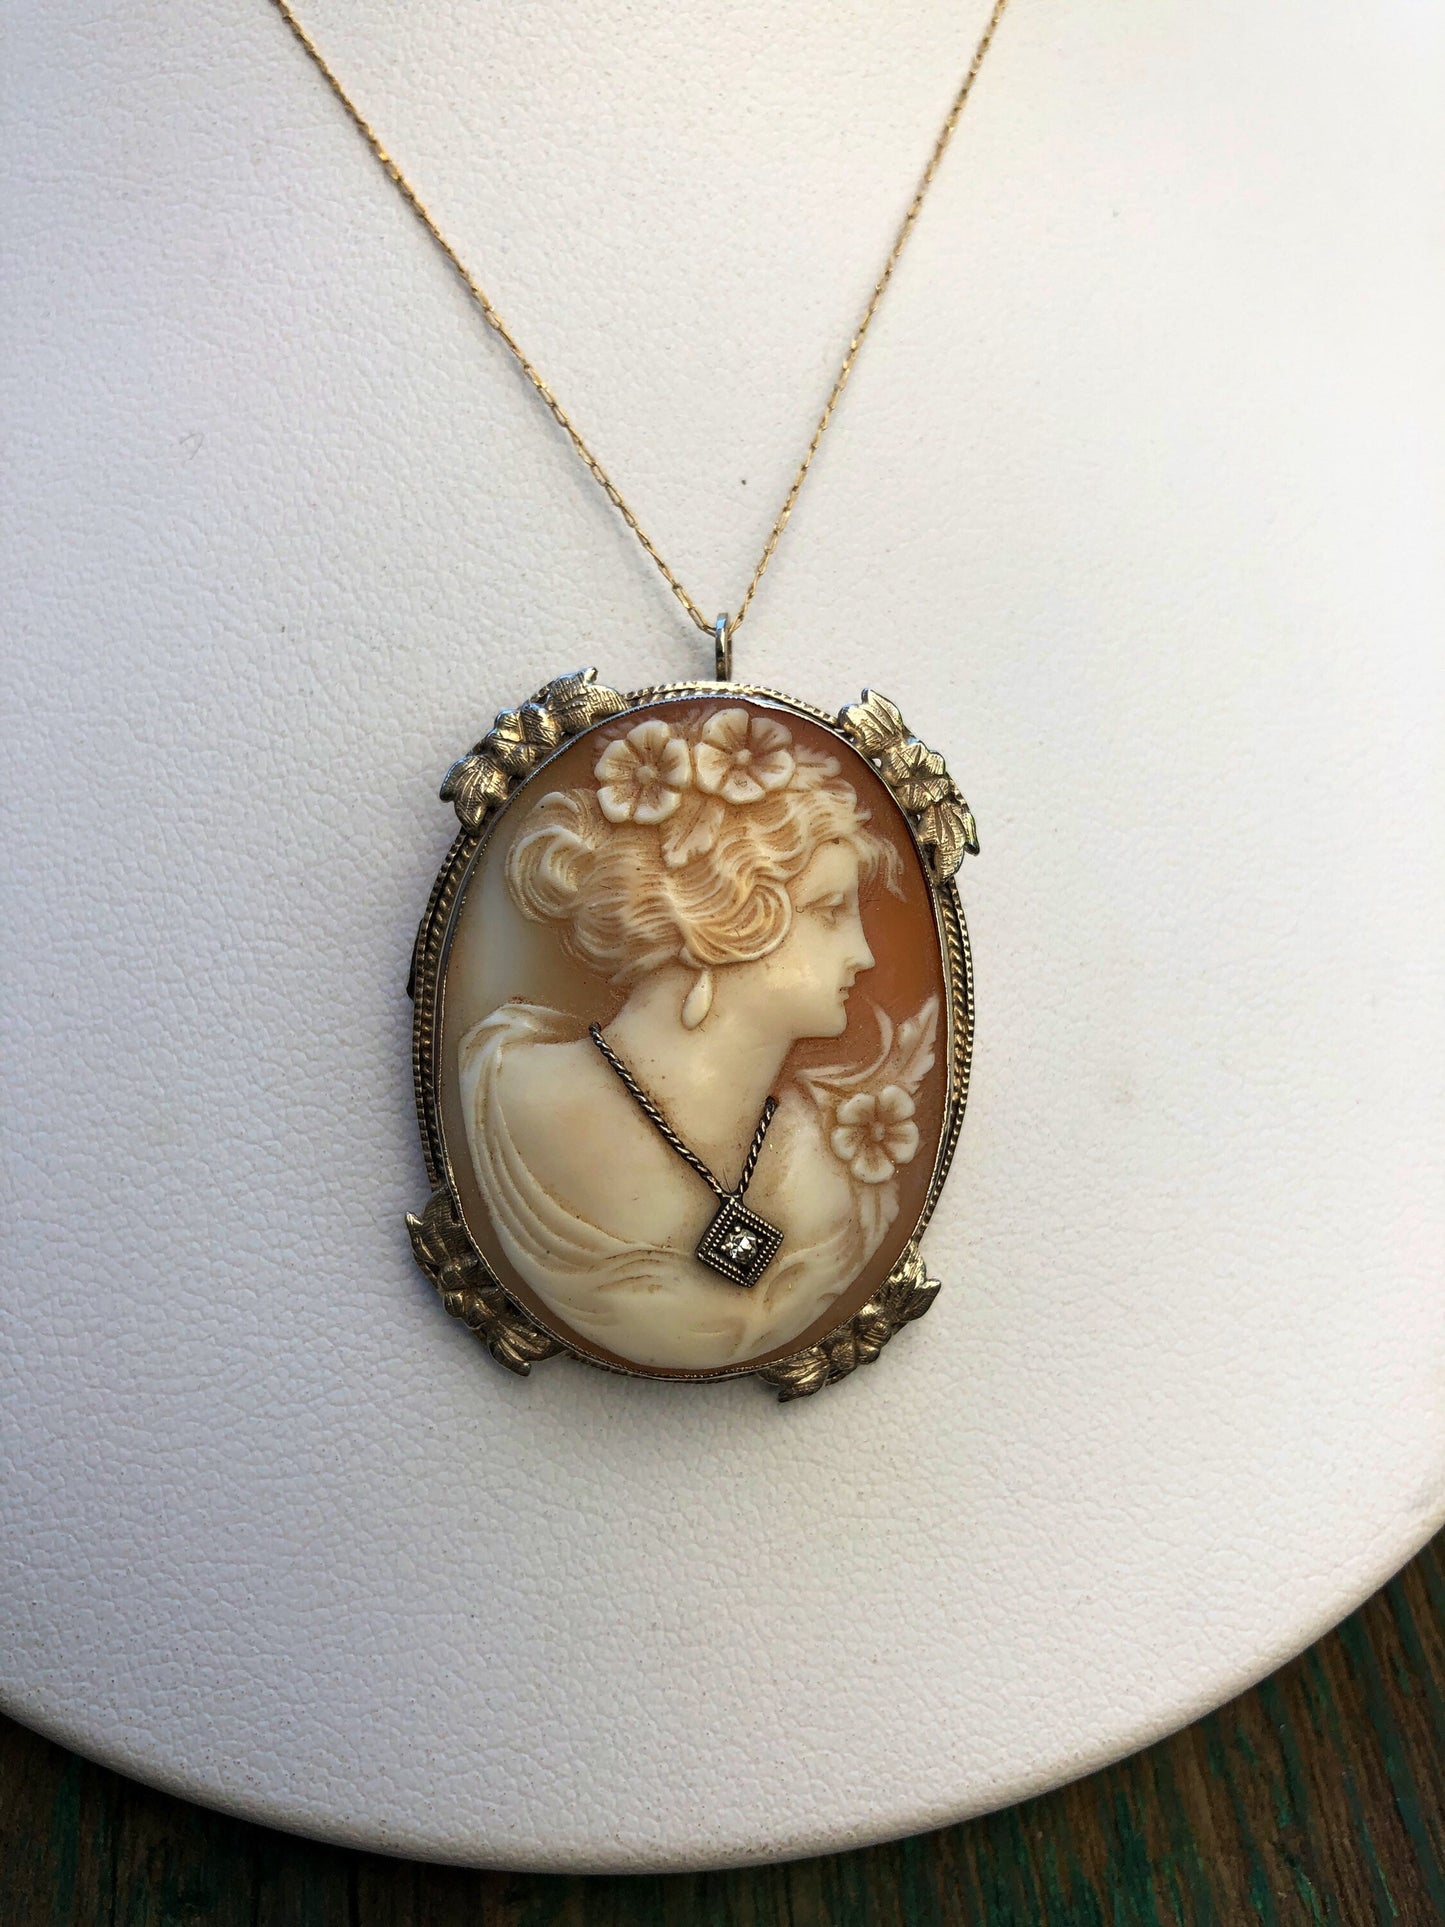 14K Gold Set Carved Shell Cameo with Diamond Necklace Brooch & Pendant with 14k Gold Chain